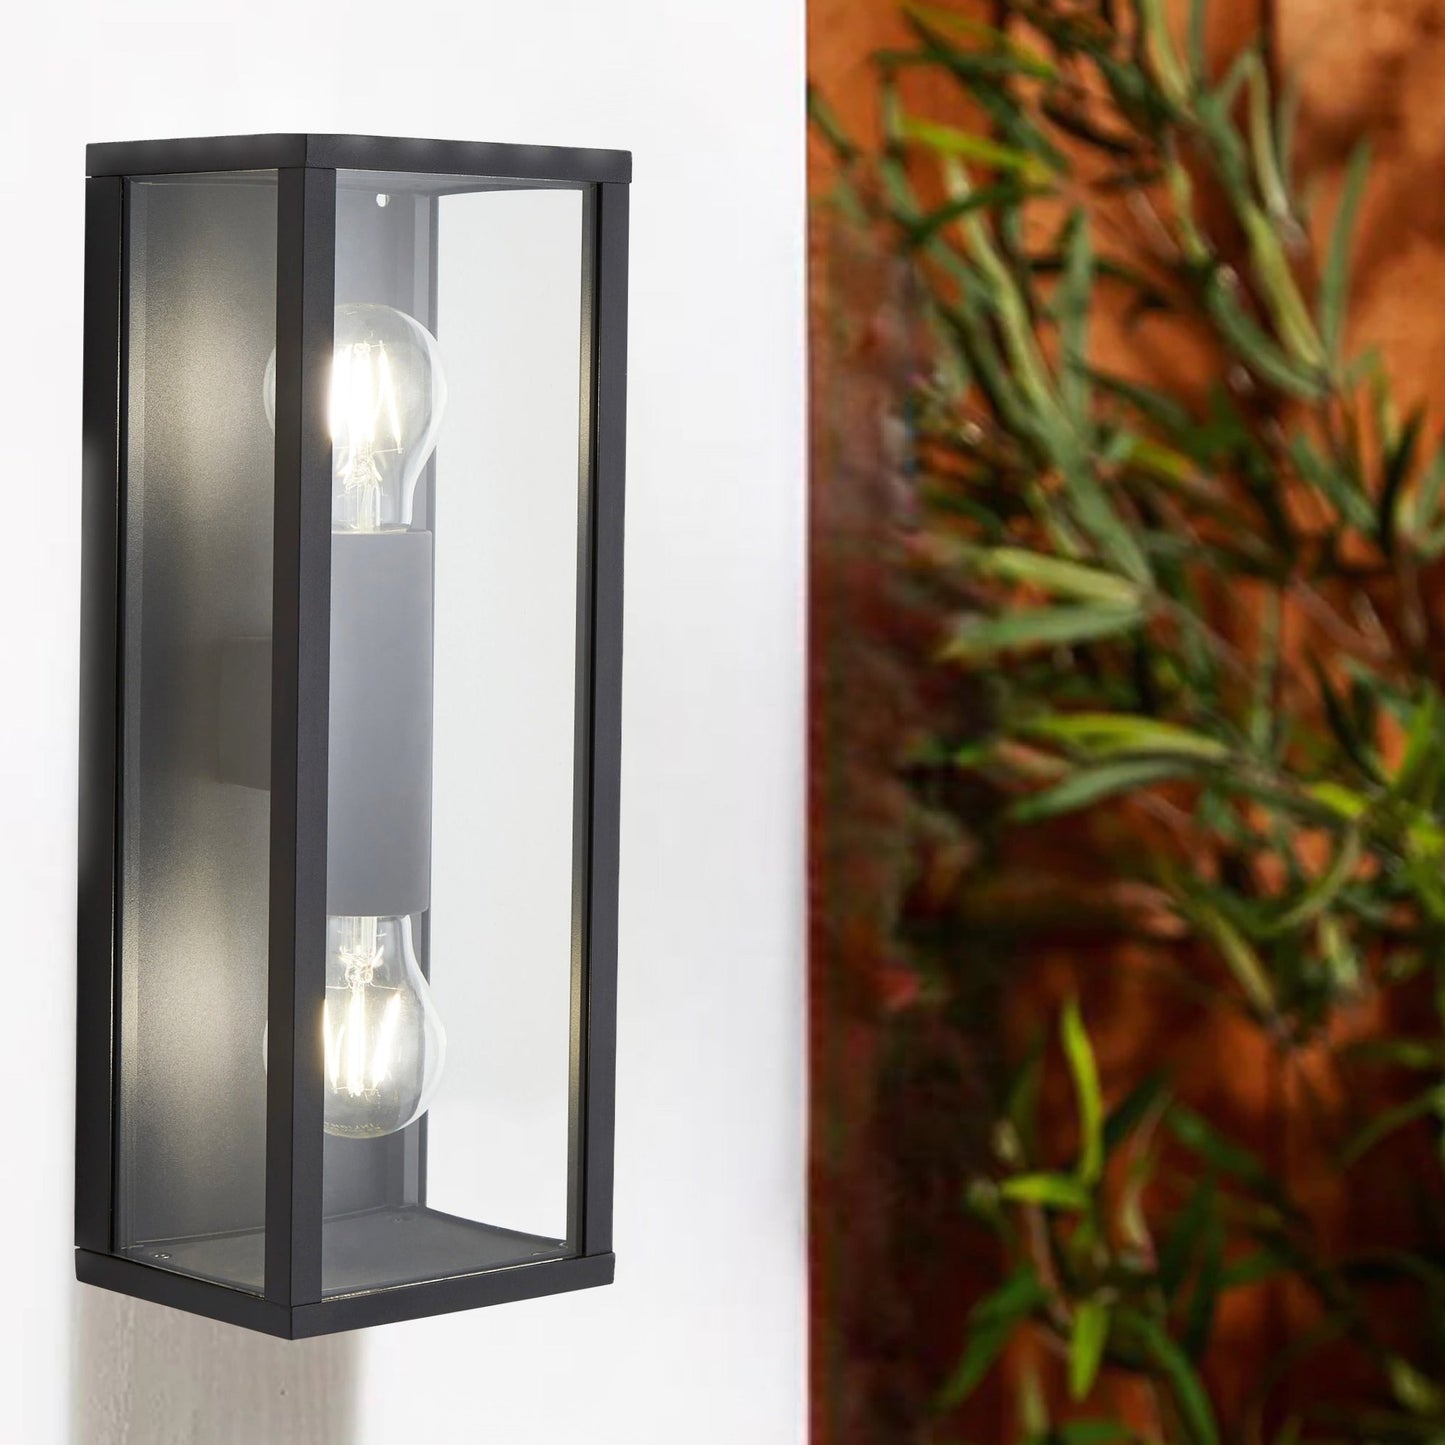 A modern take on a traditional design outdoor wall light perfect for adding style and security The traditional front-door lantern has had a modern make over in the form of our Seb double up and down wall light with its square glass windows a striking die cast matt black finish this is sure to add an statement to any wall. 